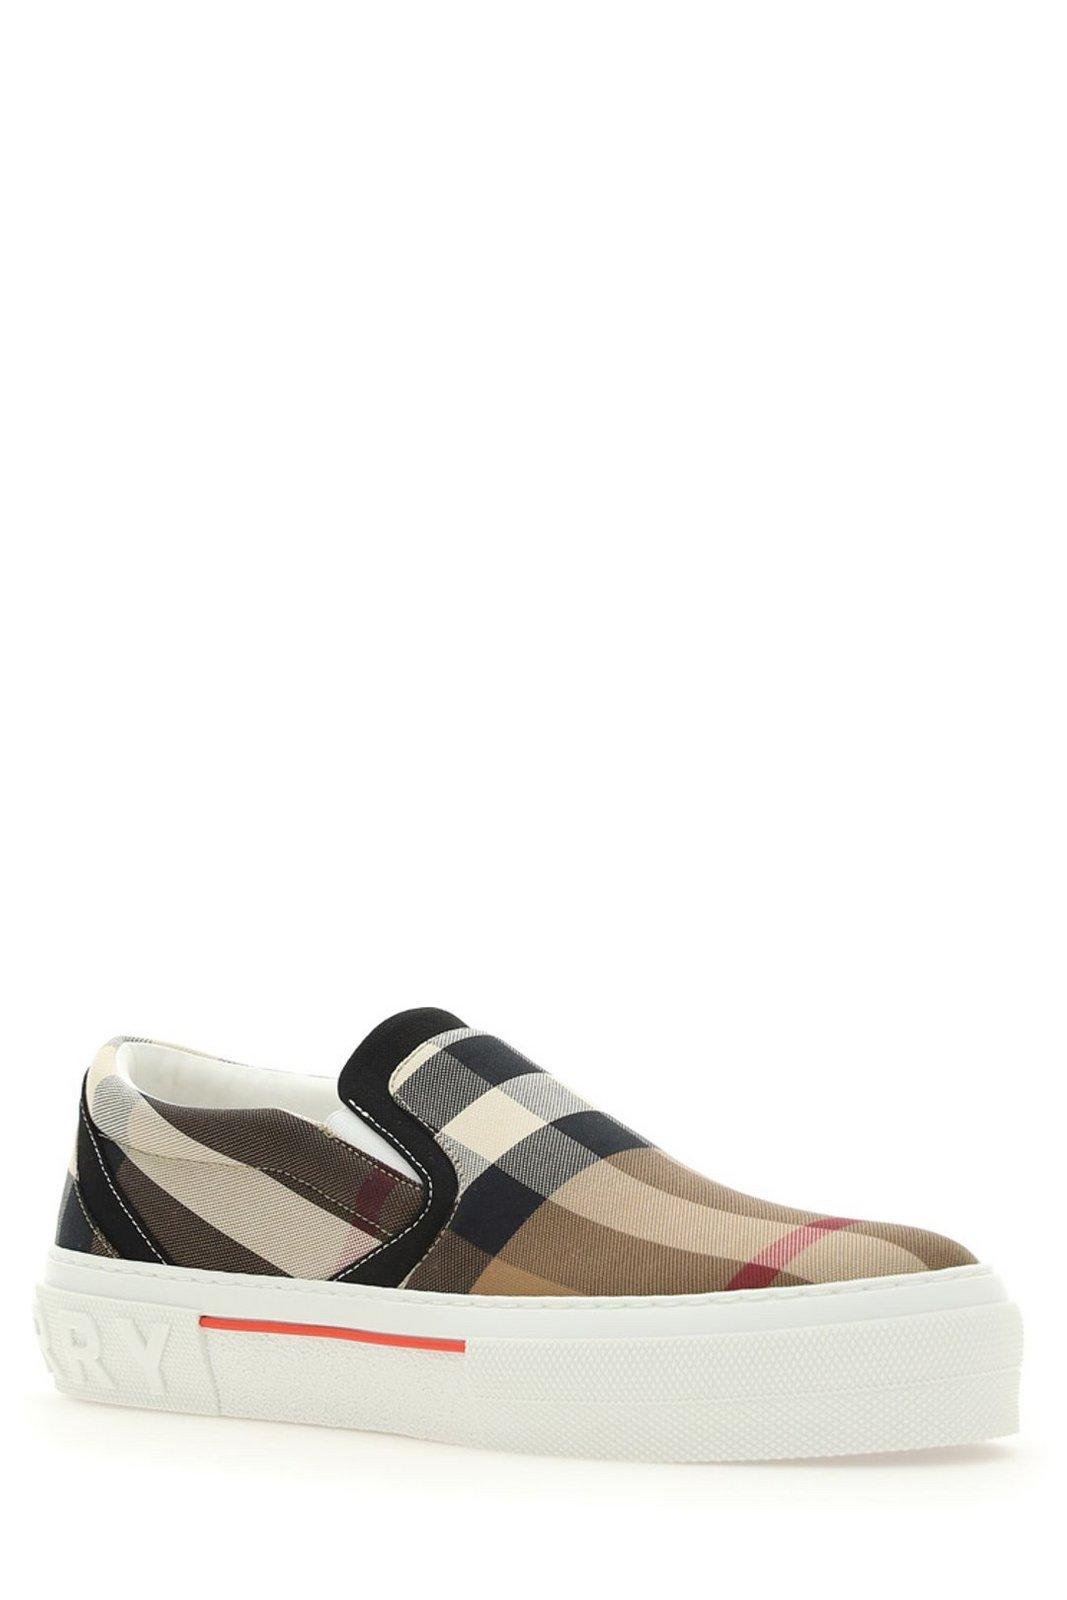 Burberry Curt Vintage Check Slip-on Sneakers